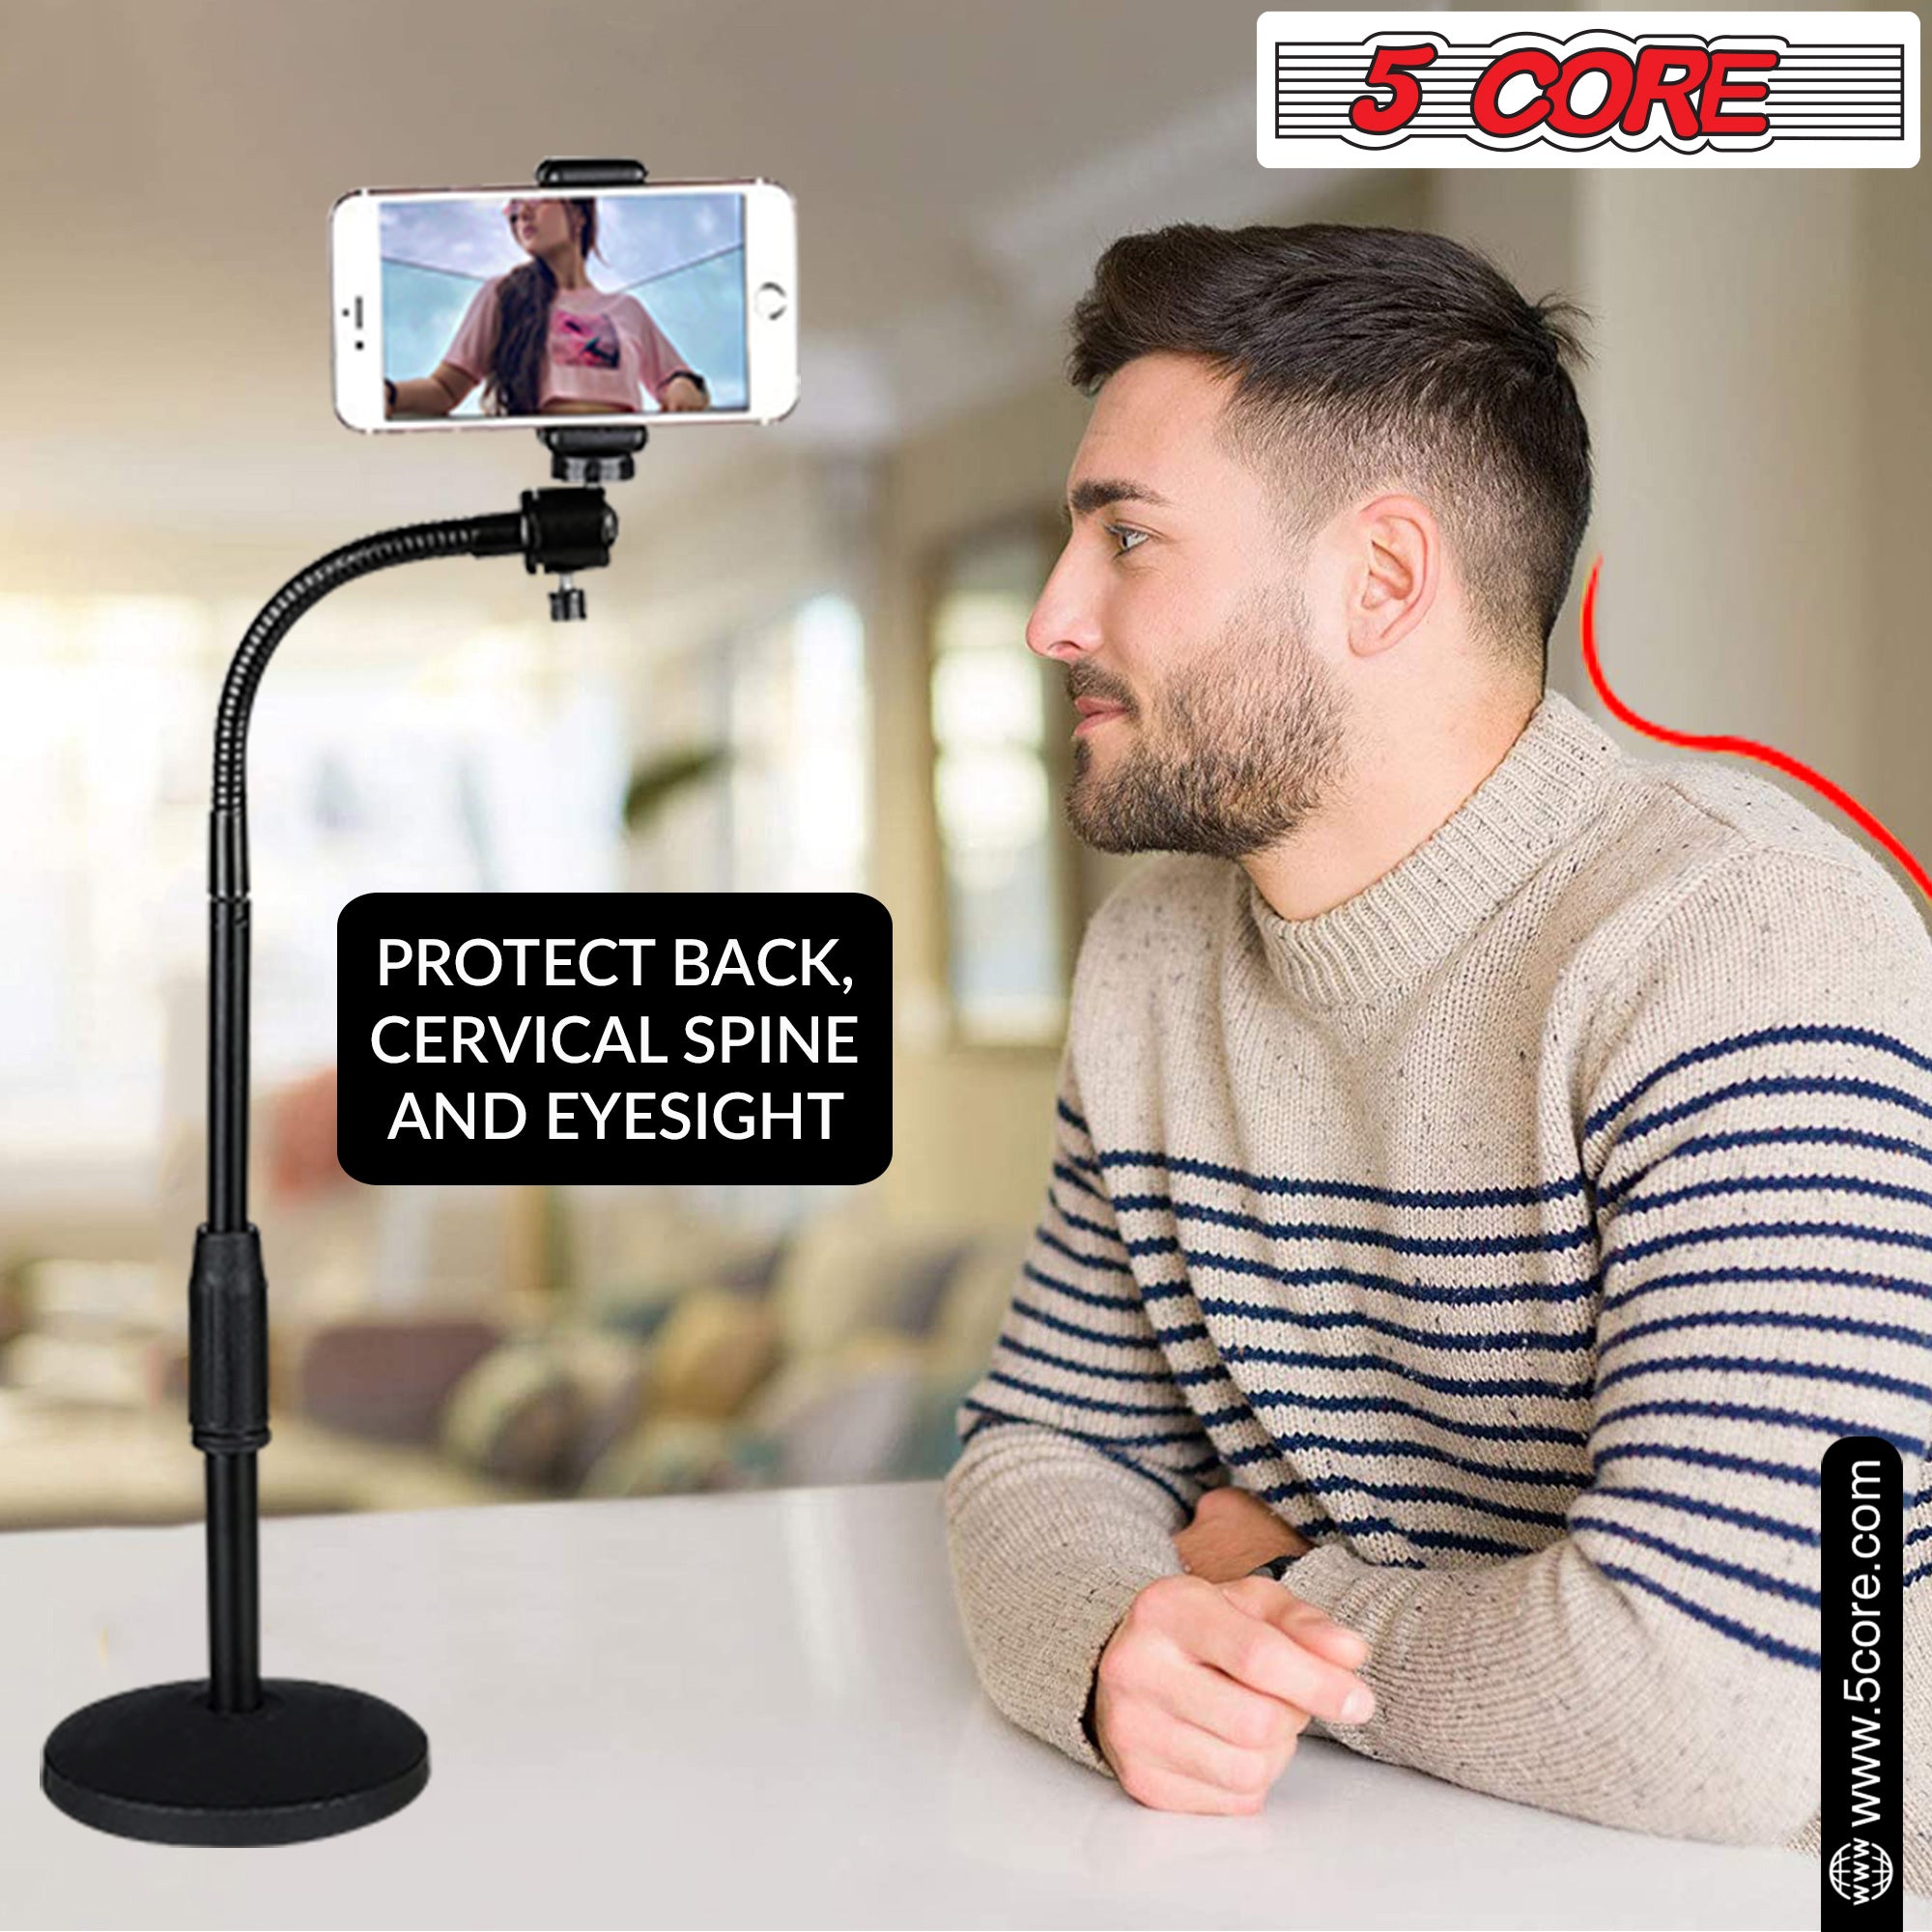 5 Core Cell Phone Stand Adjustable Height & Angle Gooseneck Stand for Desk Flexible Arm Mobile Holder Compatible with 3.5 to 6.5 Inch Device -RBS MOB